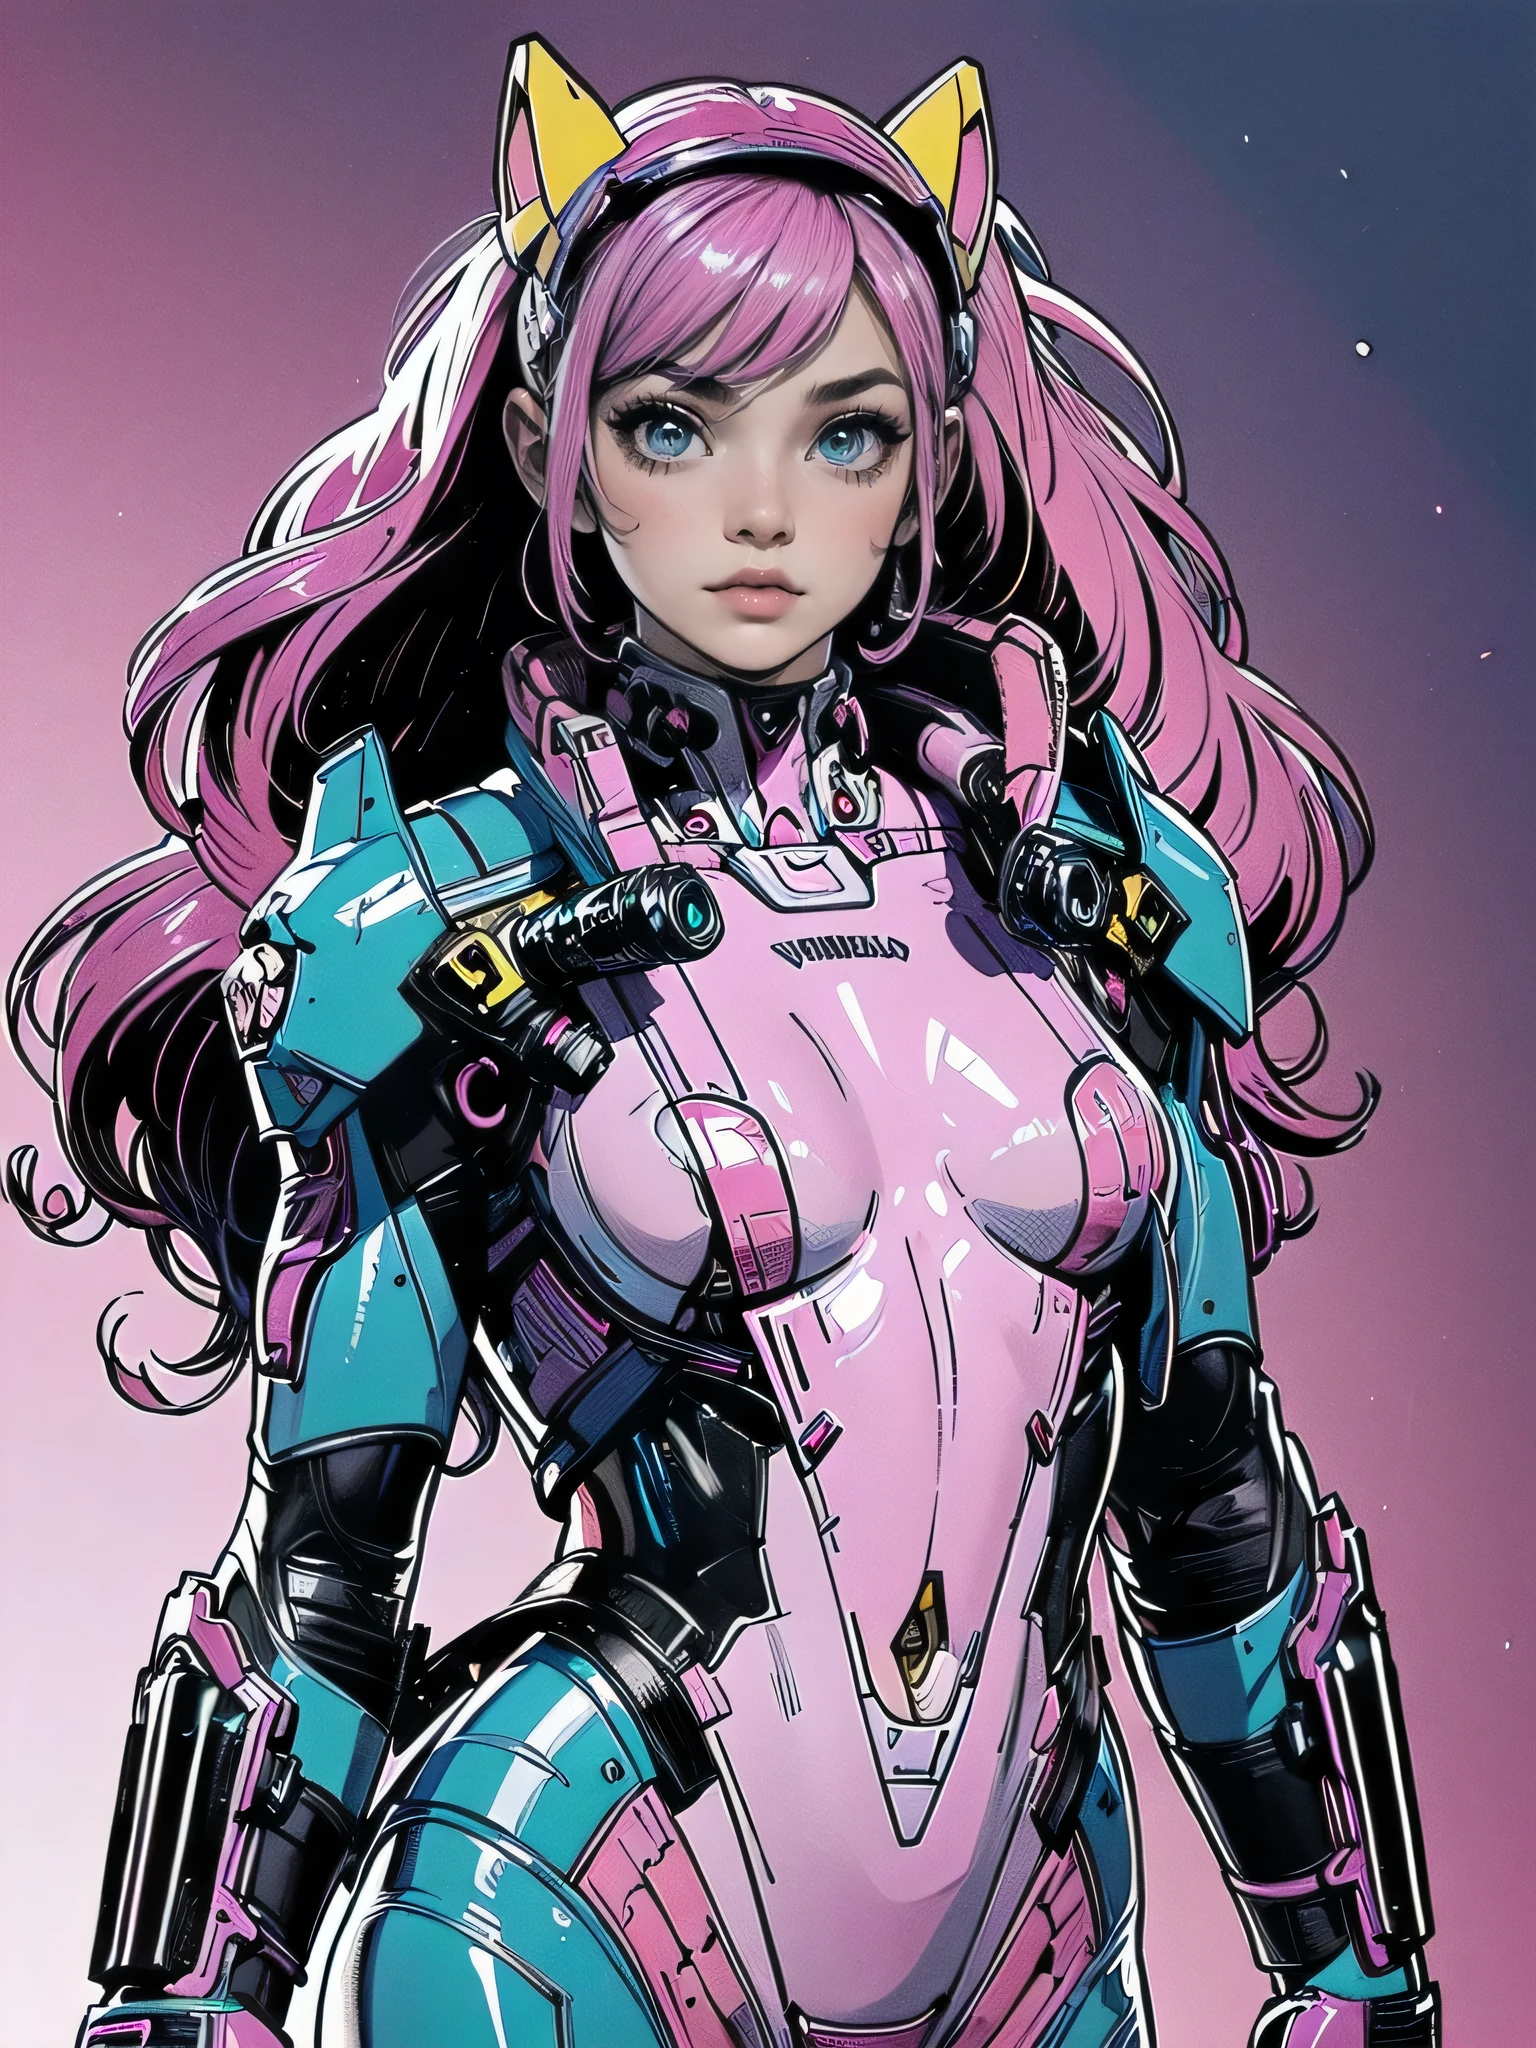 complete body shot,retro futuristic flat background,masterpiece, best quality, 1girl, solo, retro futuristic cyborgwoman, seamlessly blending mechanics and elegance. fit, small breasts, blueish skin, with magenta hair, fashion modeling pose, form fitting pastel yellow and pink with black colorblocking gundam suit-like-armor,kitty_ear headpiece, happy, wild pink punky hair, humanoid face with bigger eyes and some cyberparts holding a retro futuristoc space-gun, flat graphic futuristic background, intense colors, Anime, Cartoon, Comic Book, Concept Art